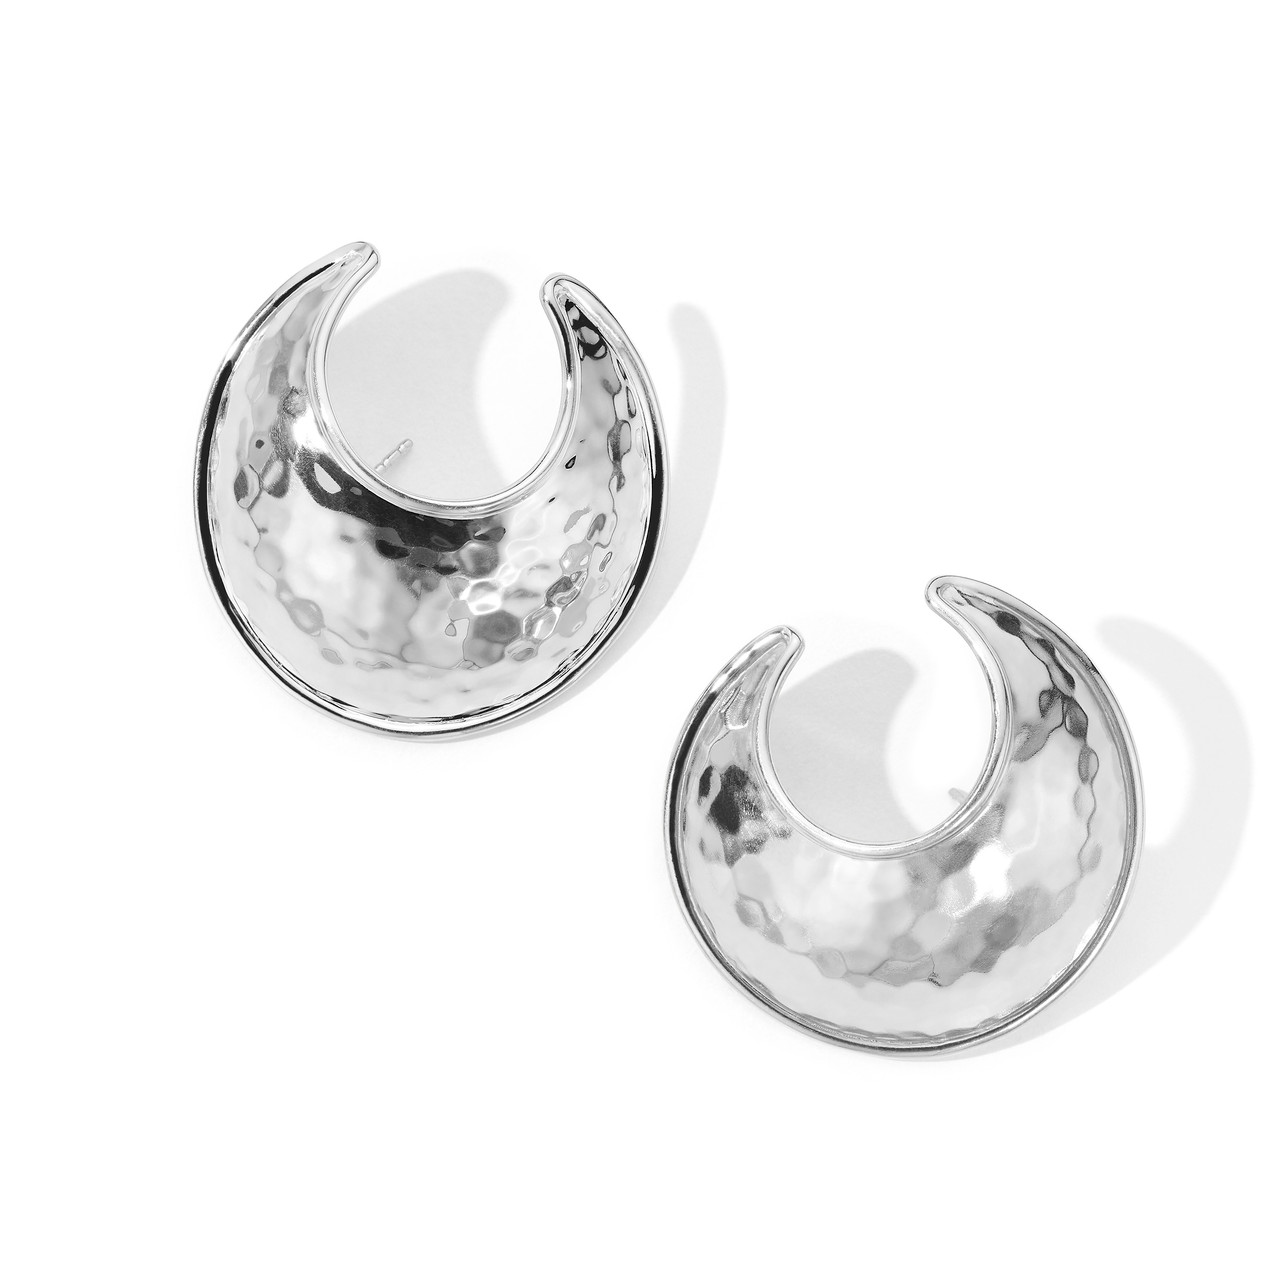 HAMMERED ROUND SHAPE STUD EARRING - sterling silver - Schoolhouse Earth